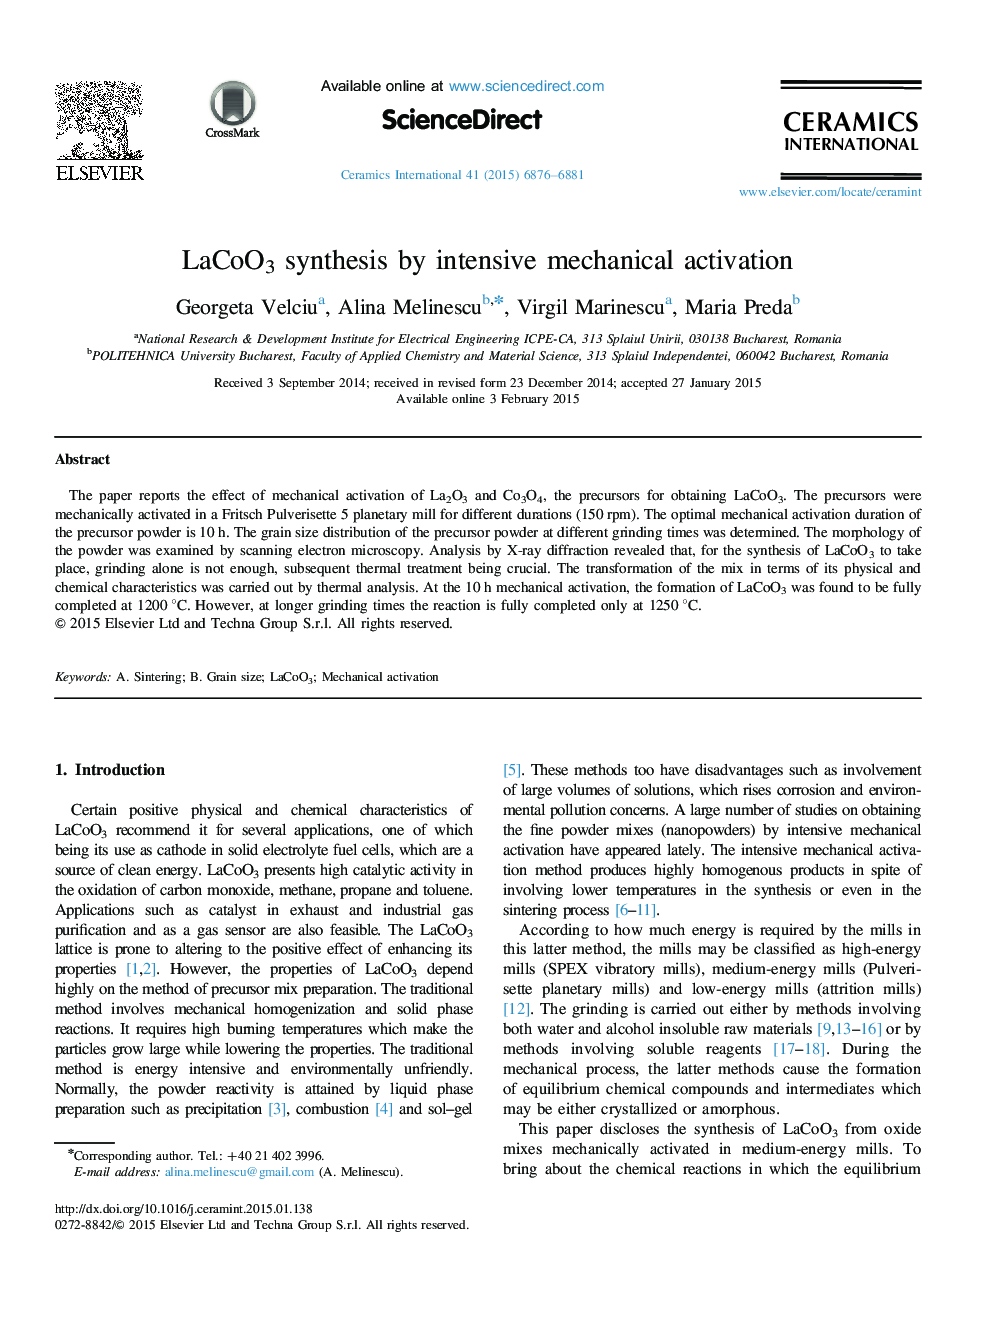 LaCoO3 synthesis by intensive mechanical activation